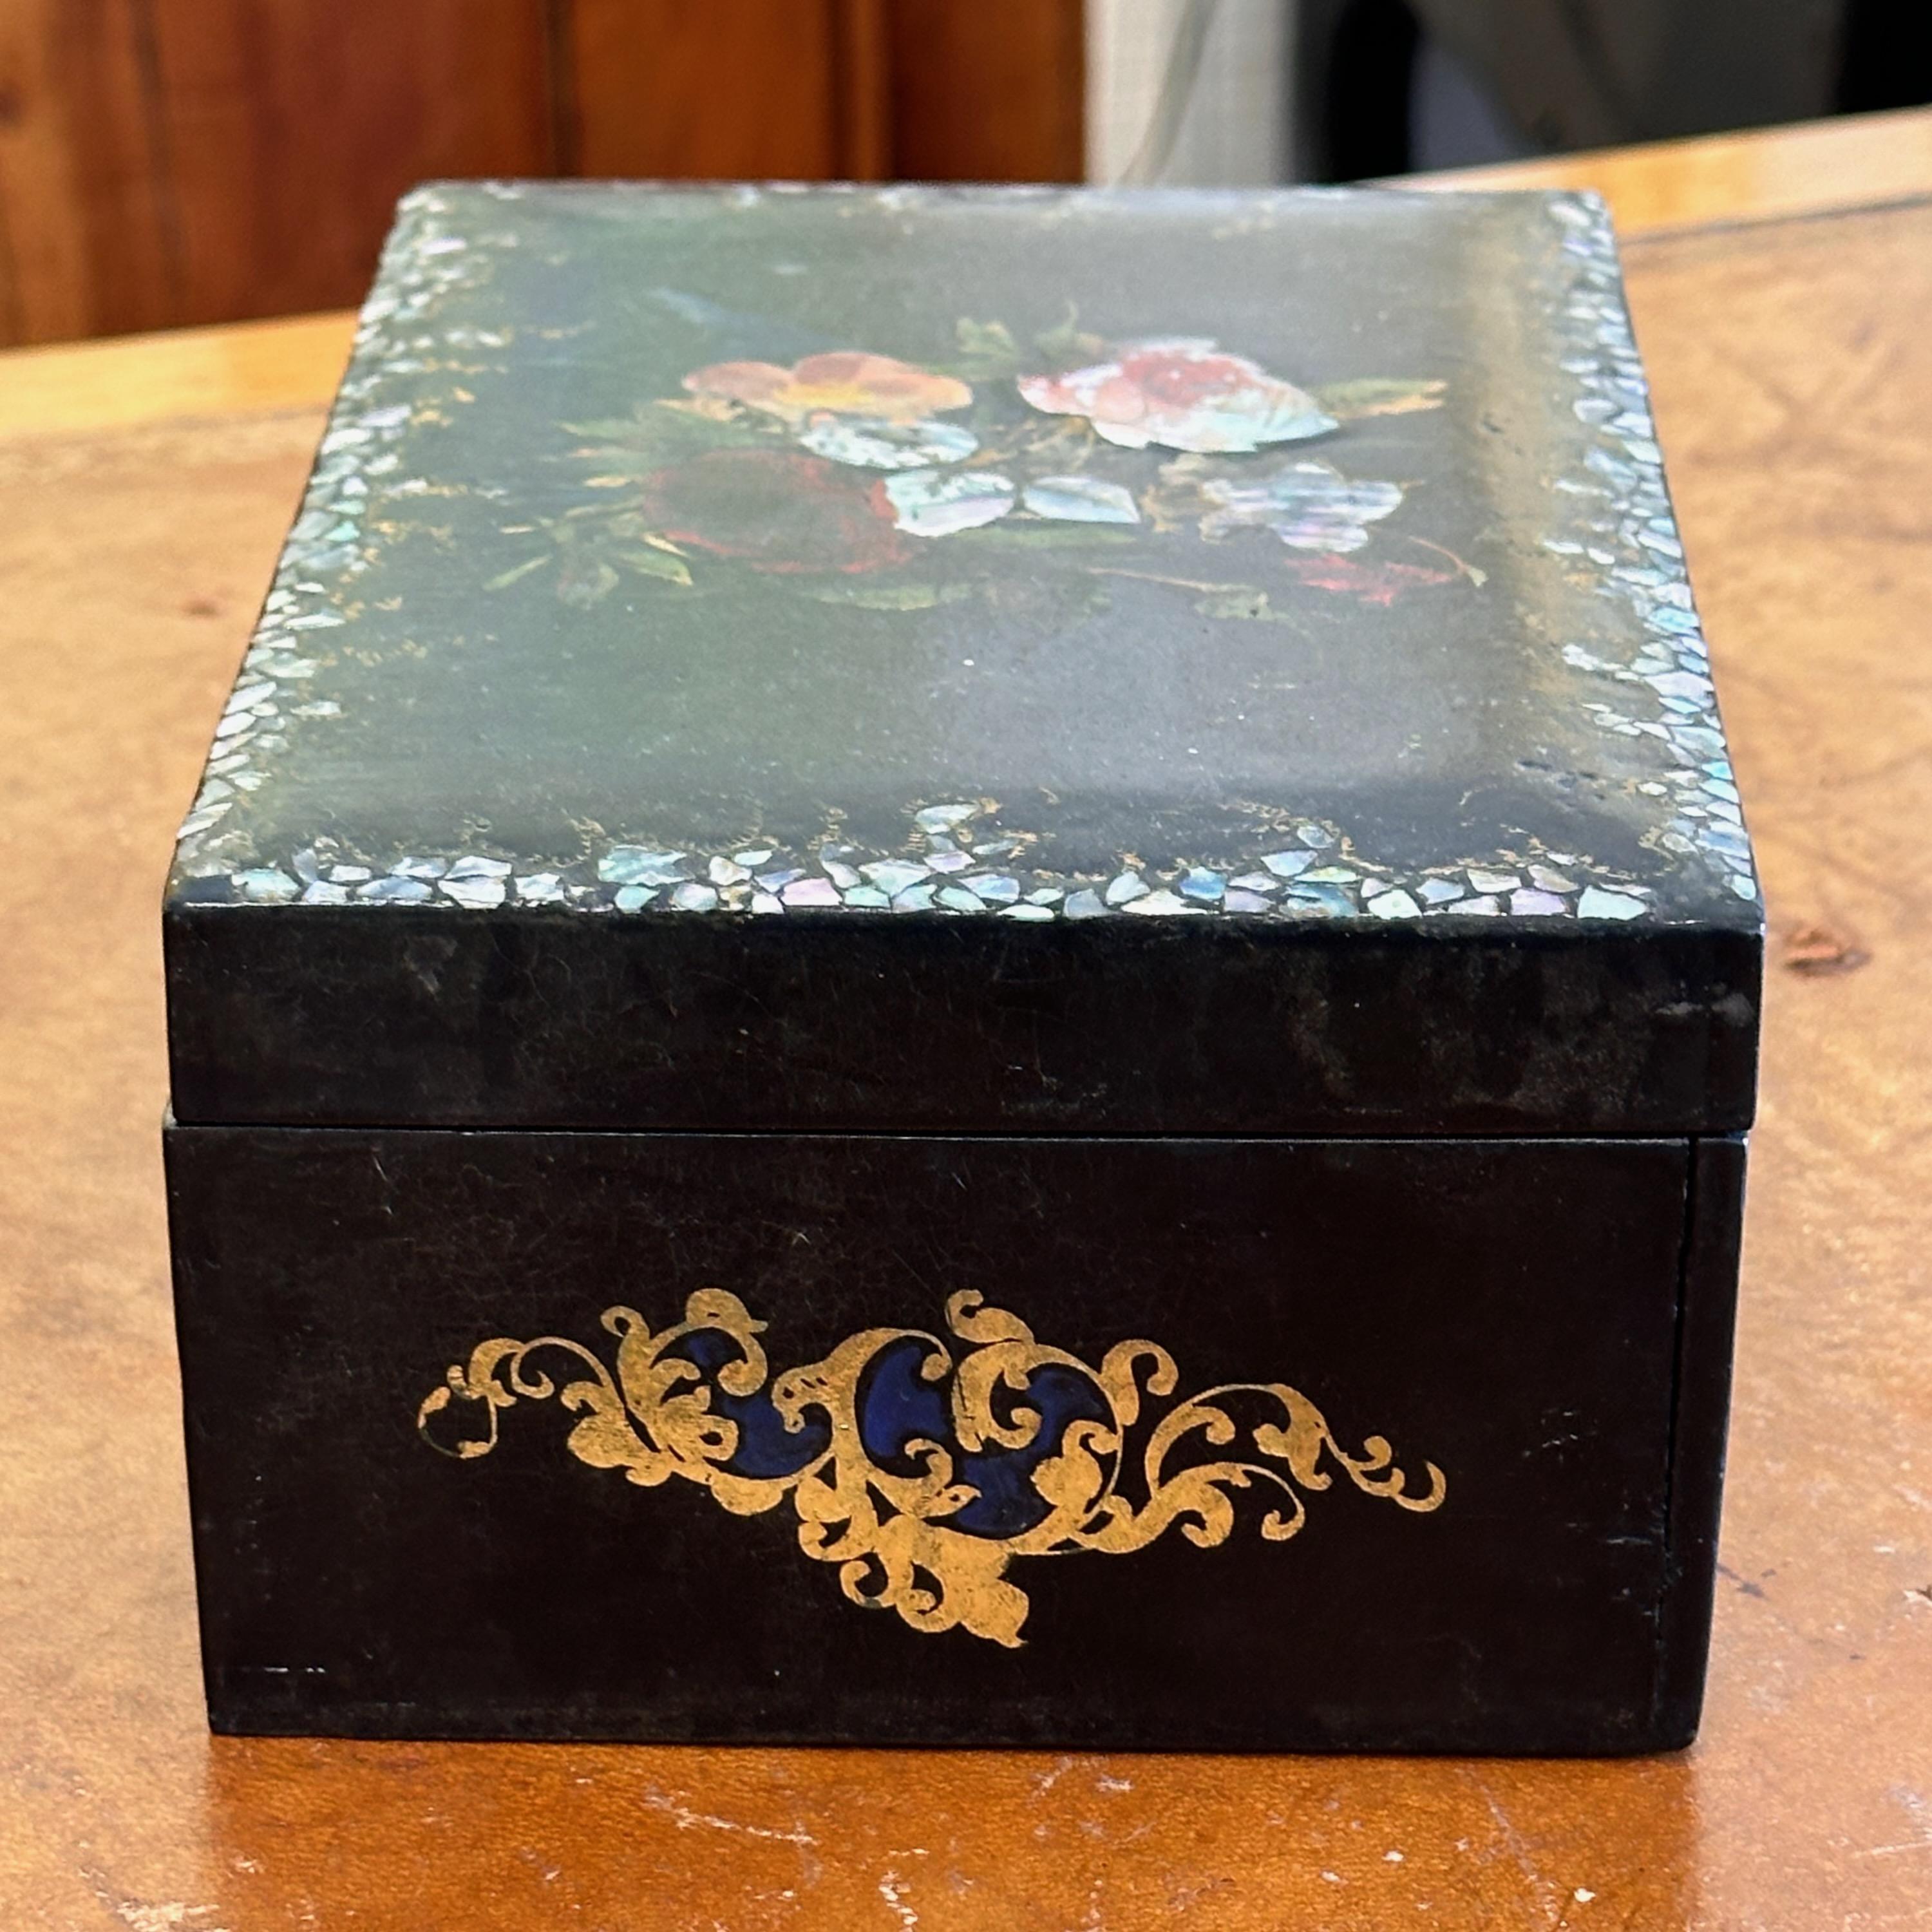 A black lacquered box with inlay decorations.